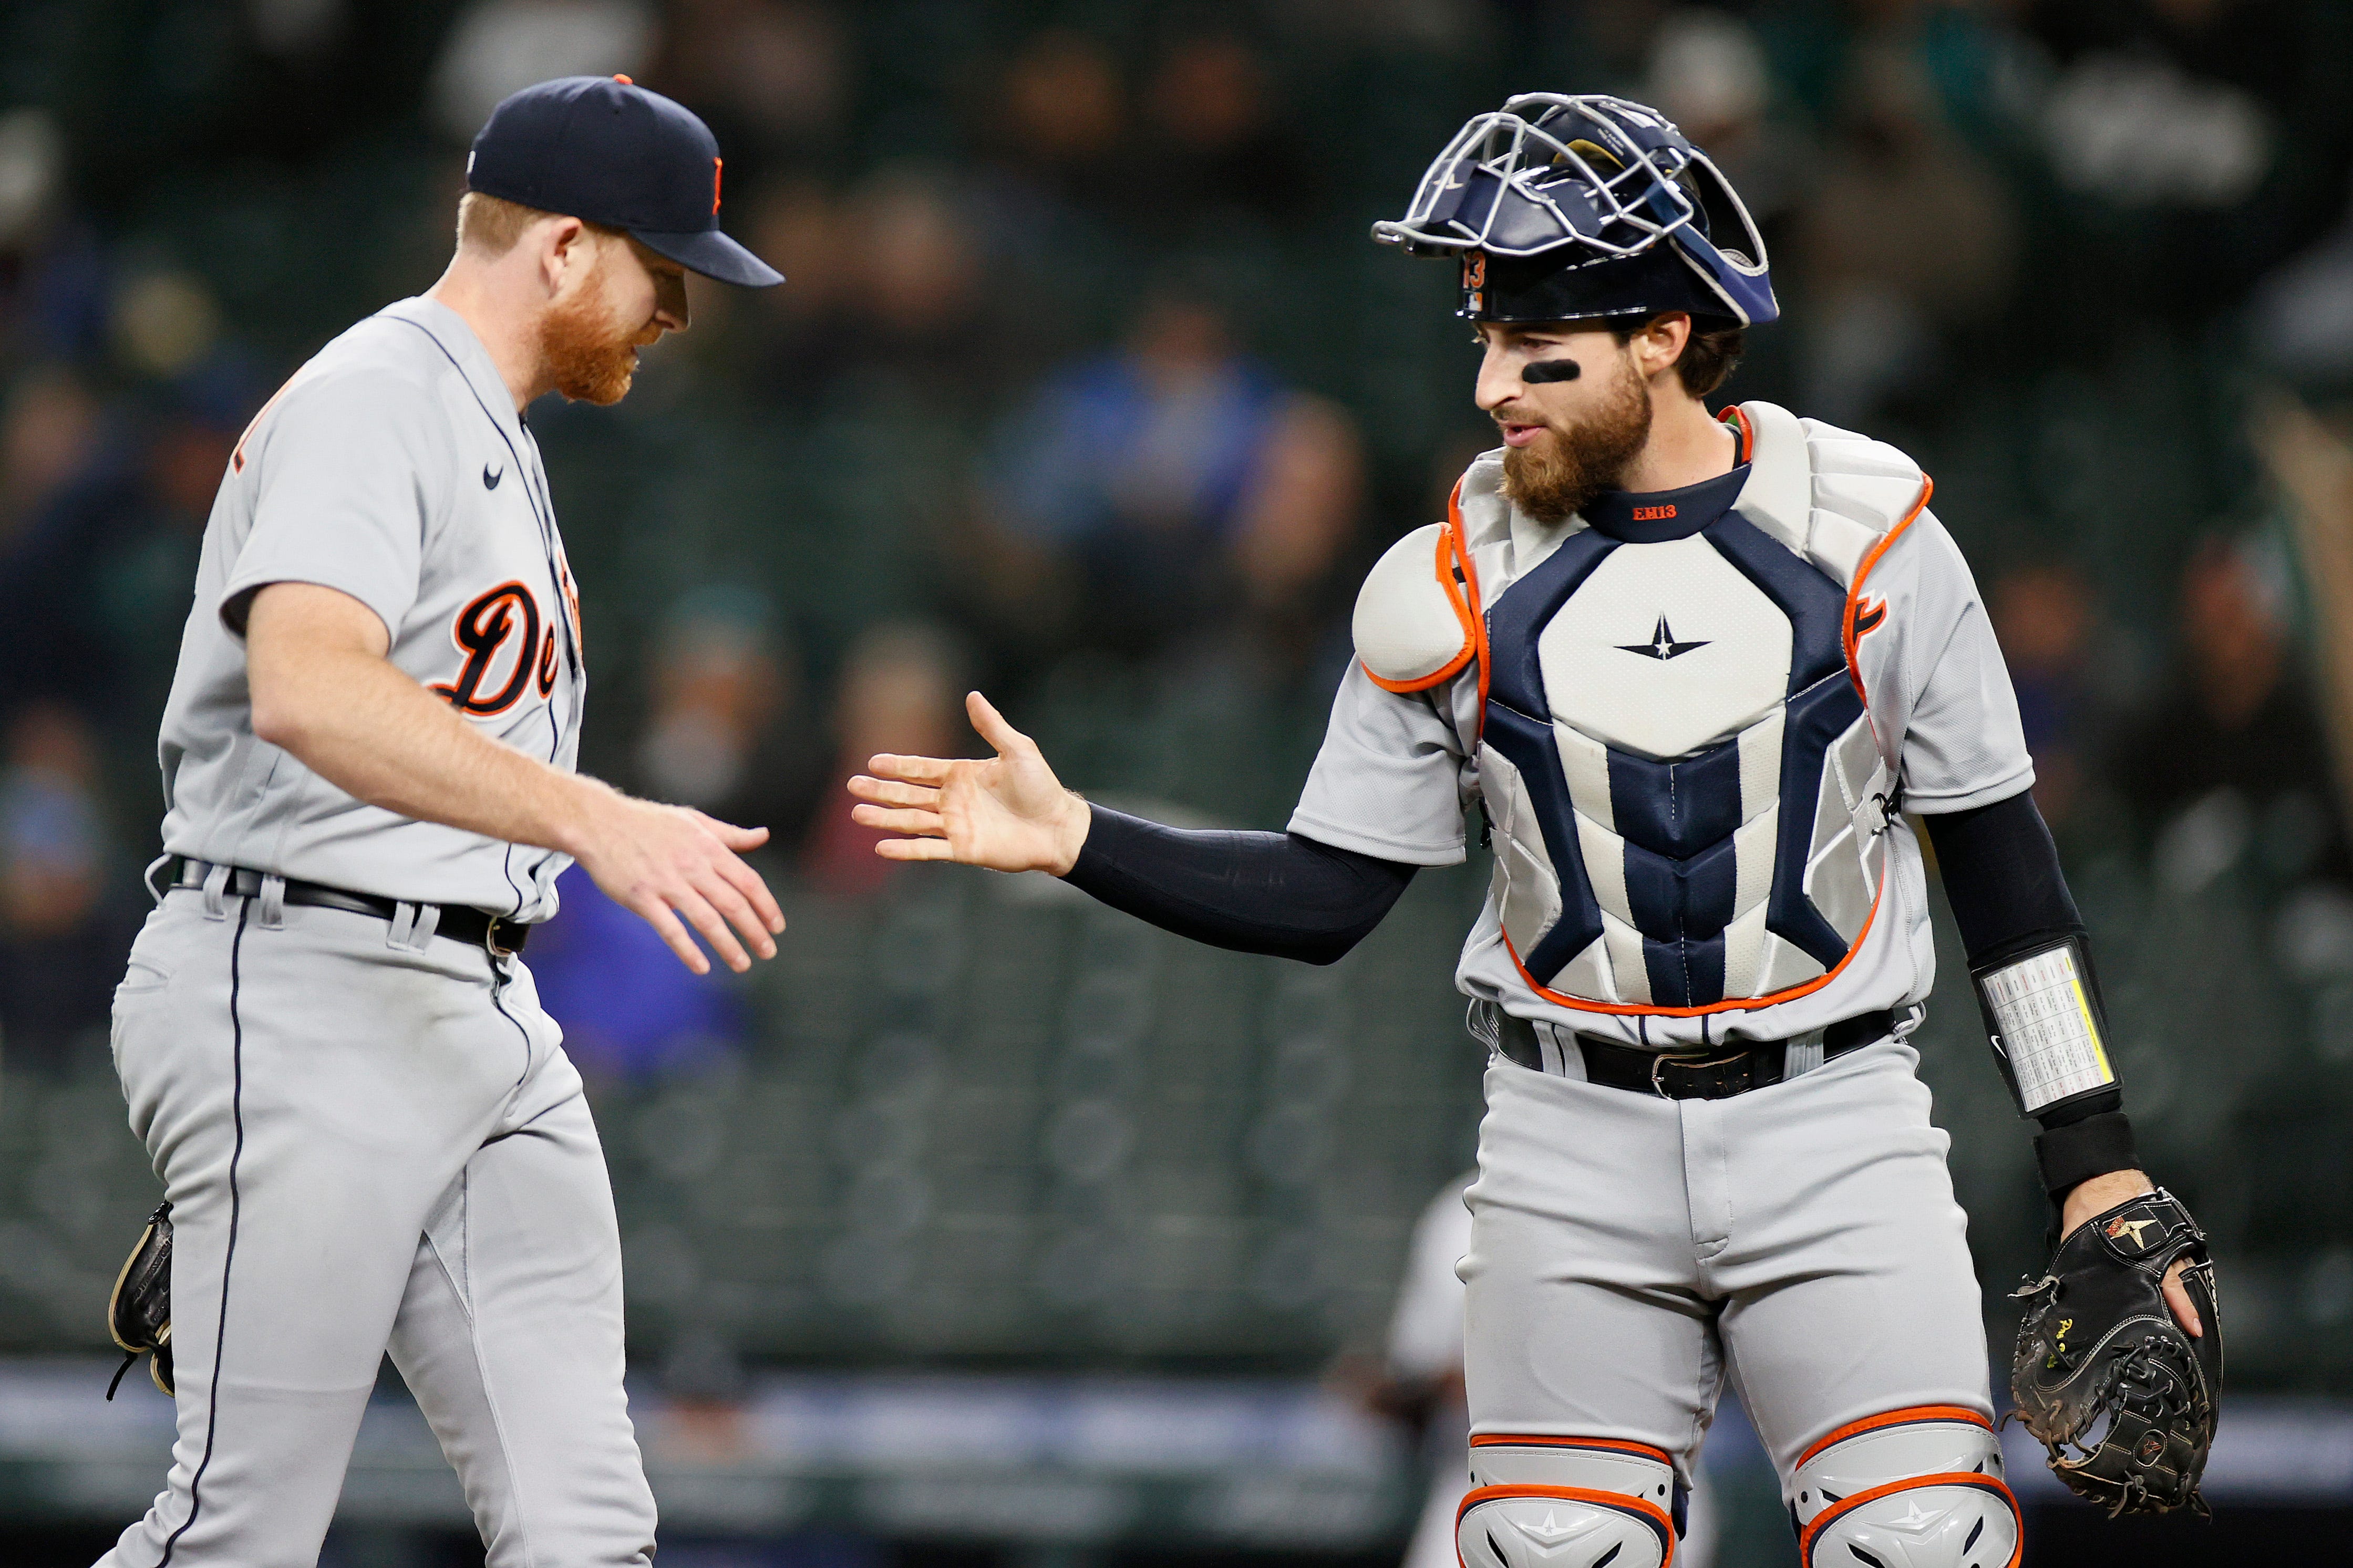 Spencer Turnbull and Eric Haase celebrate after the fourth inning against the Seattle Mariners at T-Mobile Park on May 18, 2021 in Seattle, Washington.